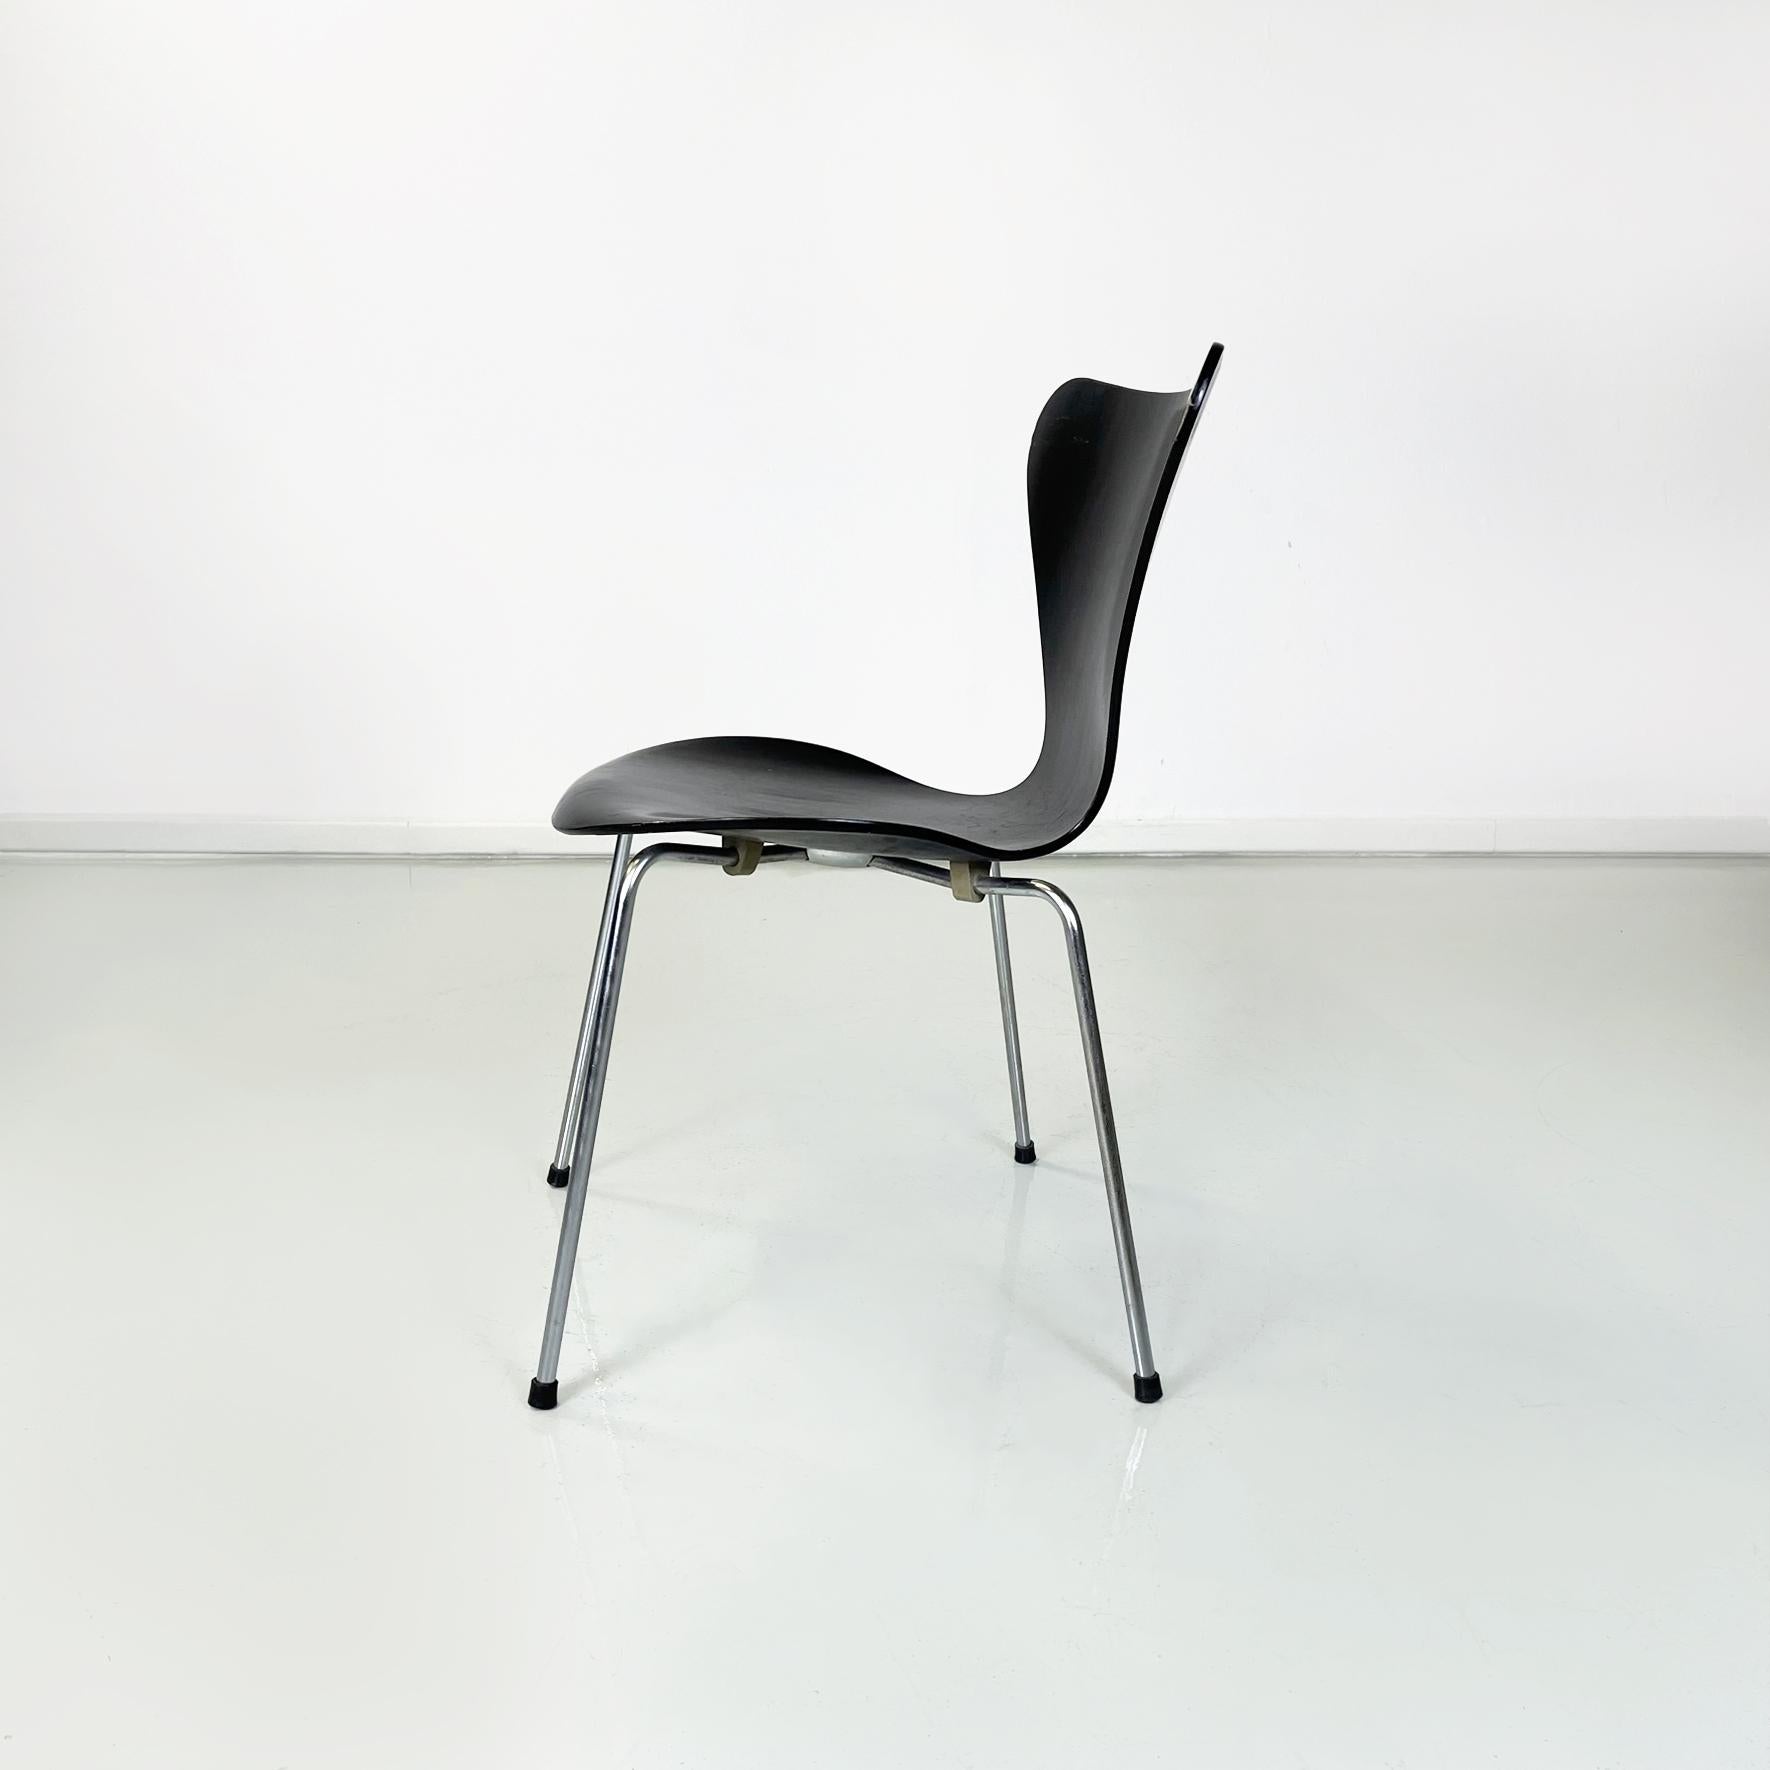 Danish modern Black wood Chairs 7 Series by Jacobsen for Fritz Hansen, 1970s In Good Condition For Sale In MIlano, IT